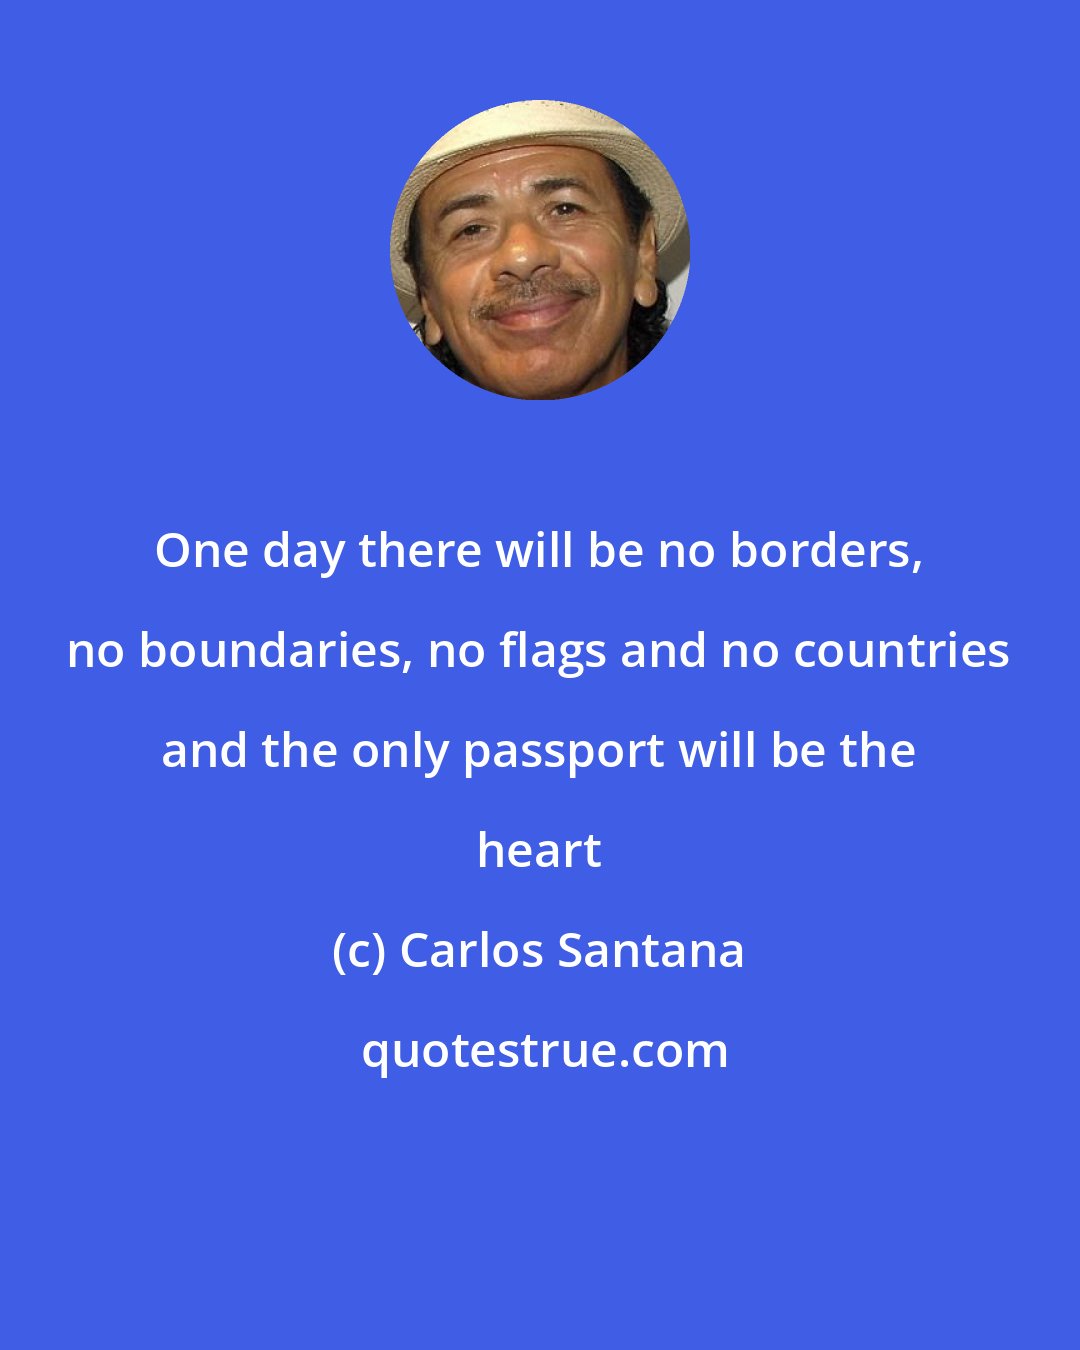 Carlos Santana: One day there will be no borders, no boundaries, no flags and no countries and the only passport will be the heart